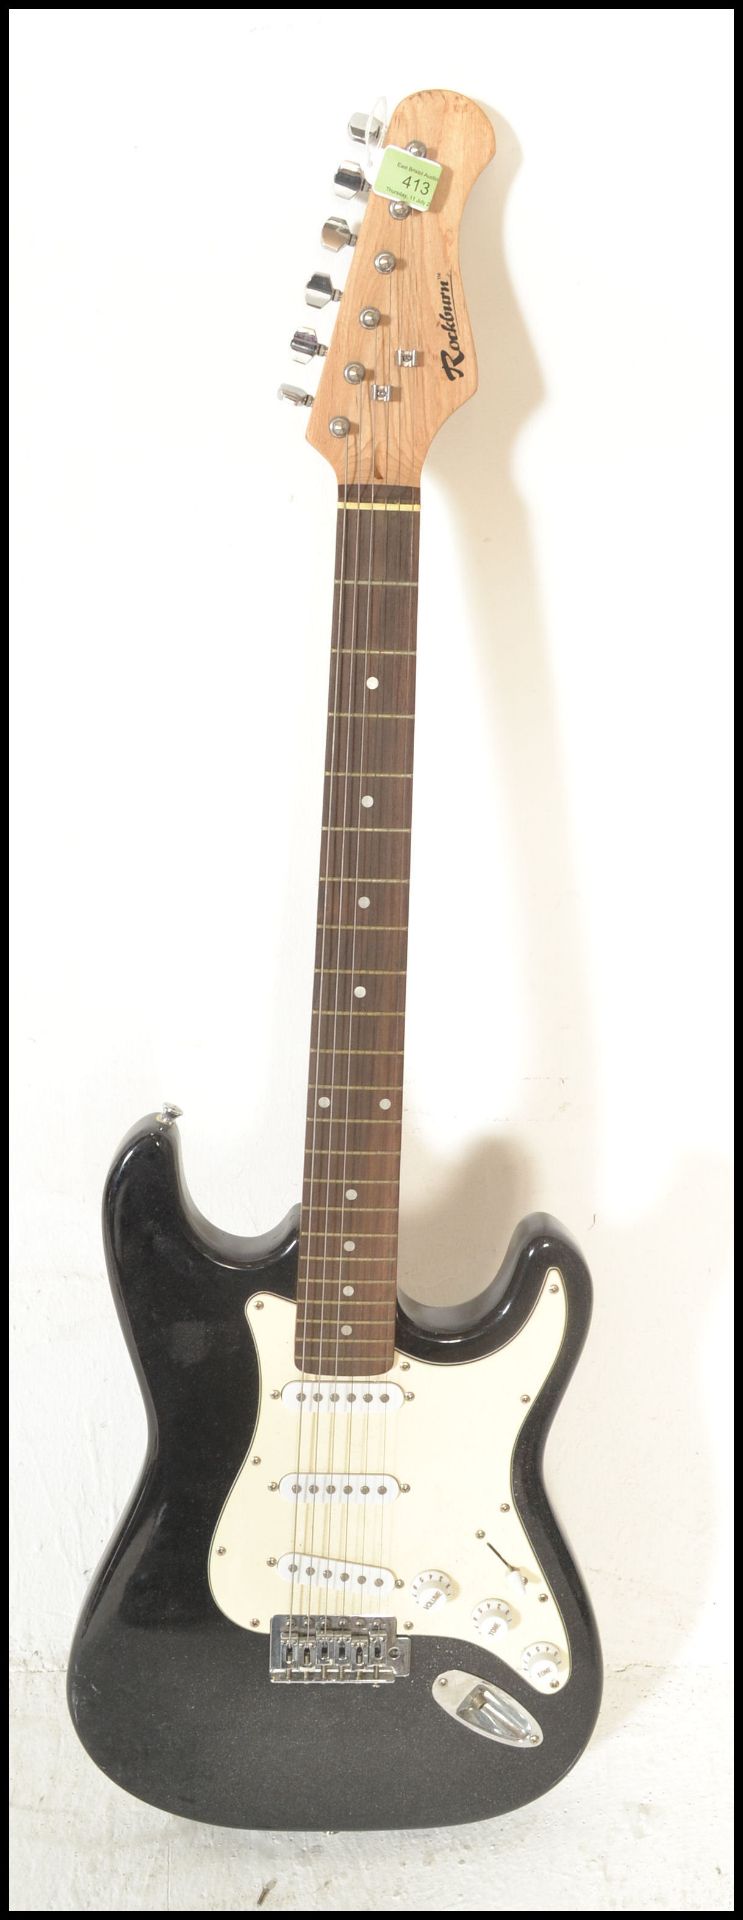 A vintage Rockburn electric six string guitar. The black body having white scratch guard with chrome